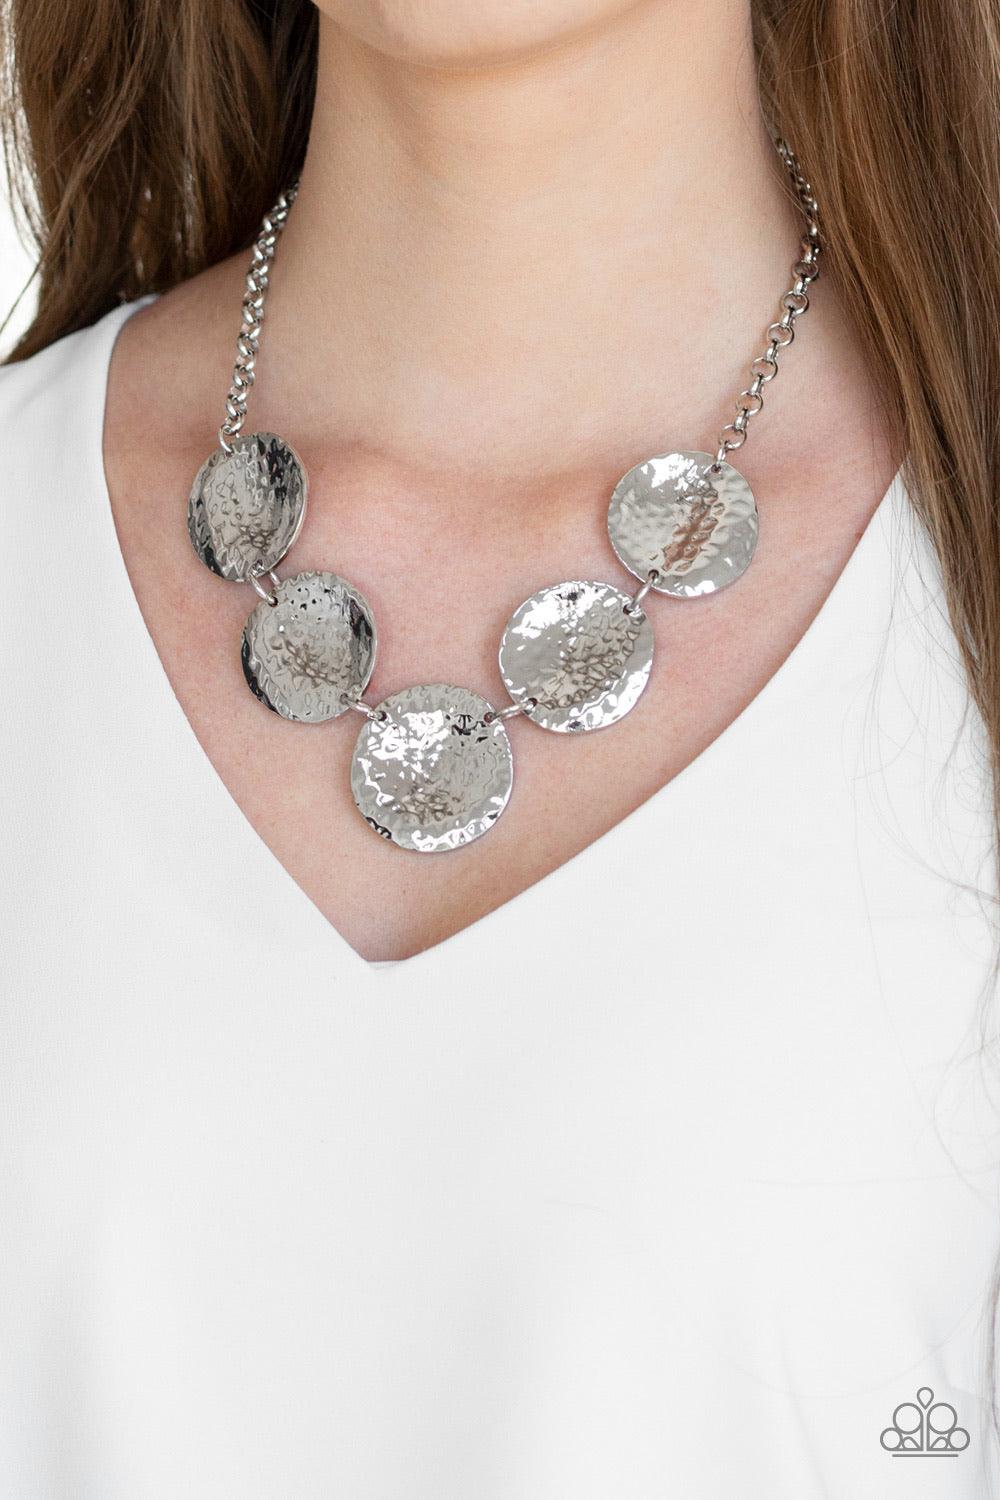 Paparazzi Accessories First Impressions - Silver Featuring a hammered high-sheen finish, imperfect round silver frames link below the collar for a casual look. Features an adjustable clasp closure. Sold as one individual necklace. Includes one pair of mat